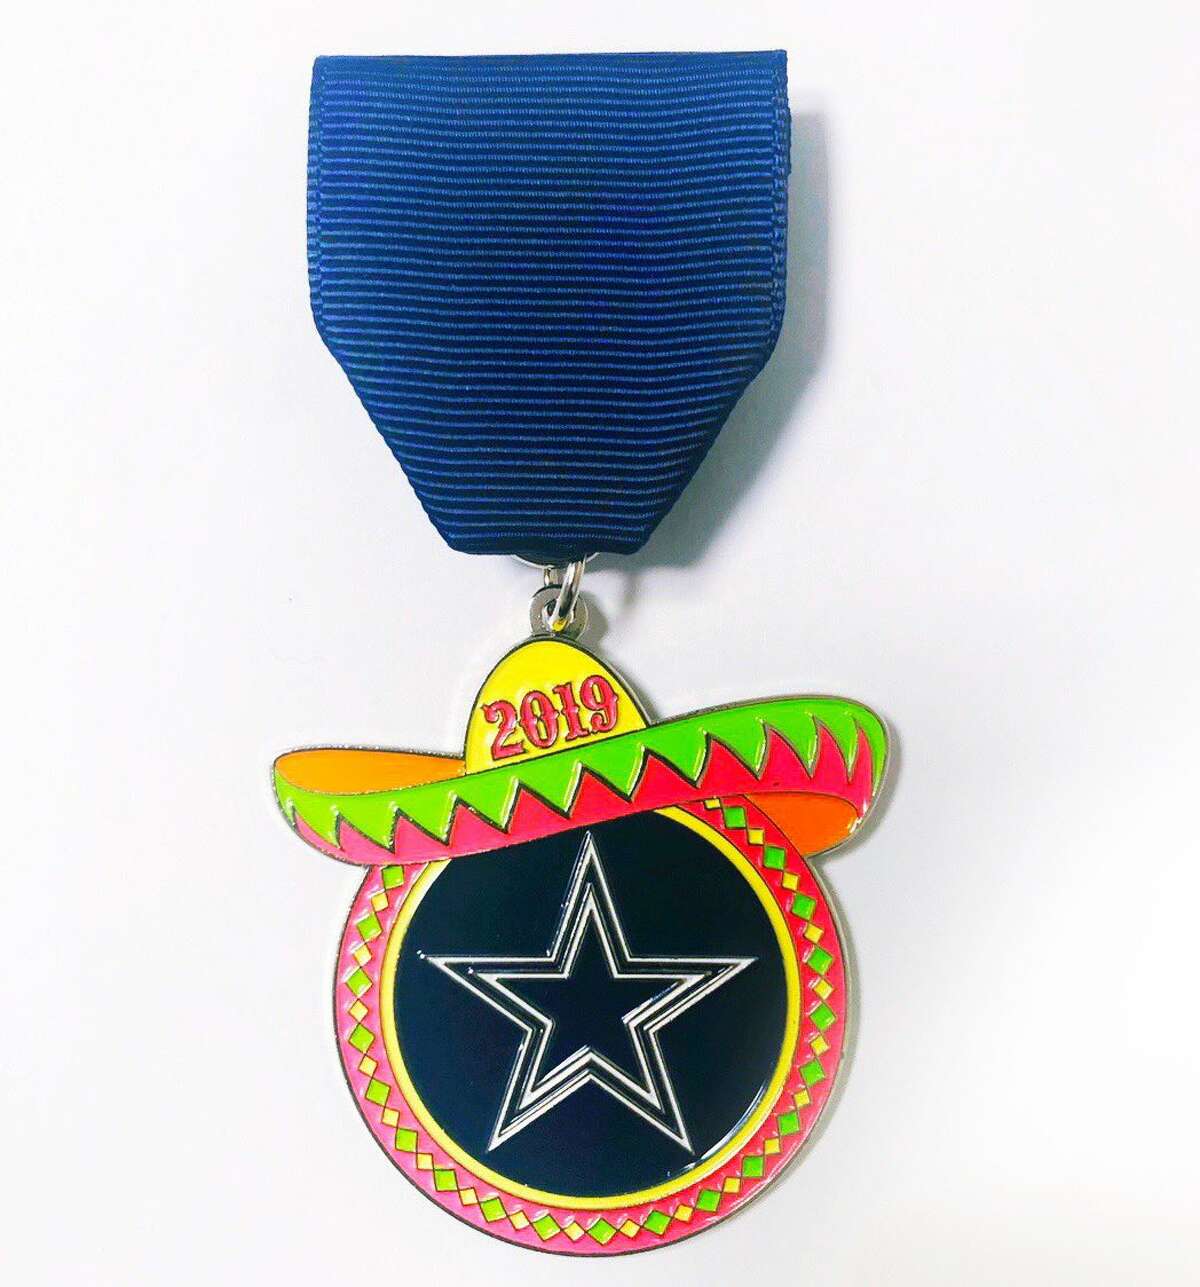 For the first time ever, the Dallas Cowboys will be a part of San Antonio's Fiesta with a team medal. The new medal features the team's logo surrounded by a colorful border and topped by a sombrero, as seen in a reveal photo tweeted by the Fiesta San Antonio Twitter account.